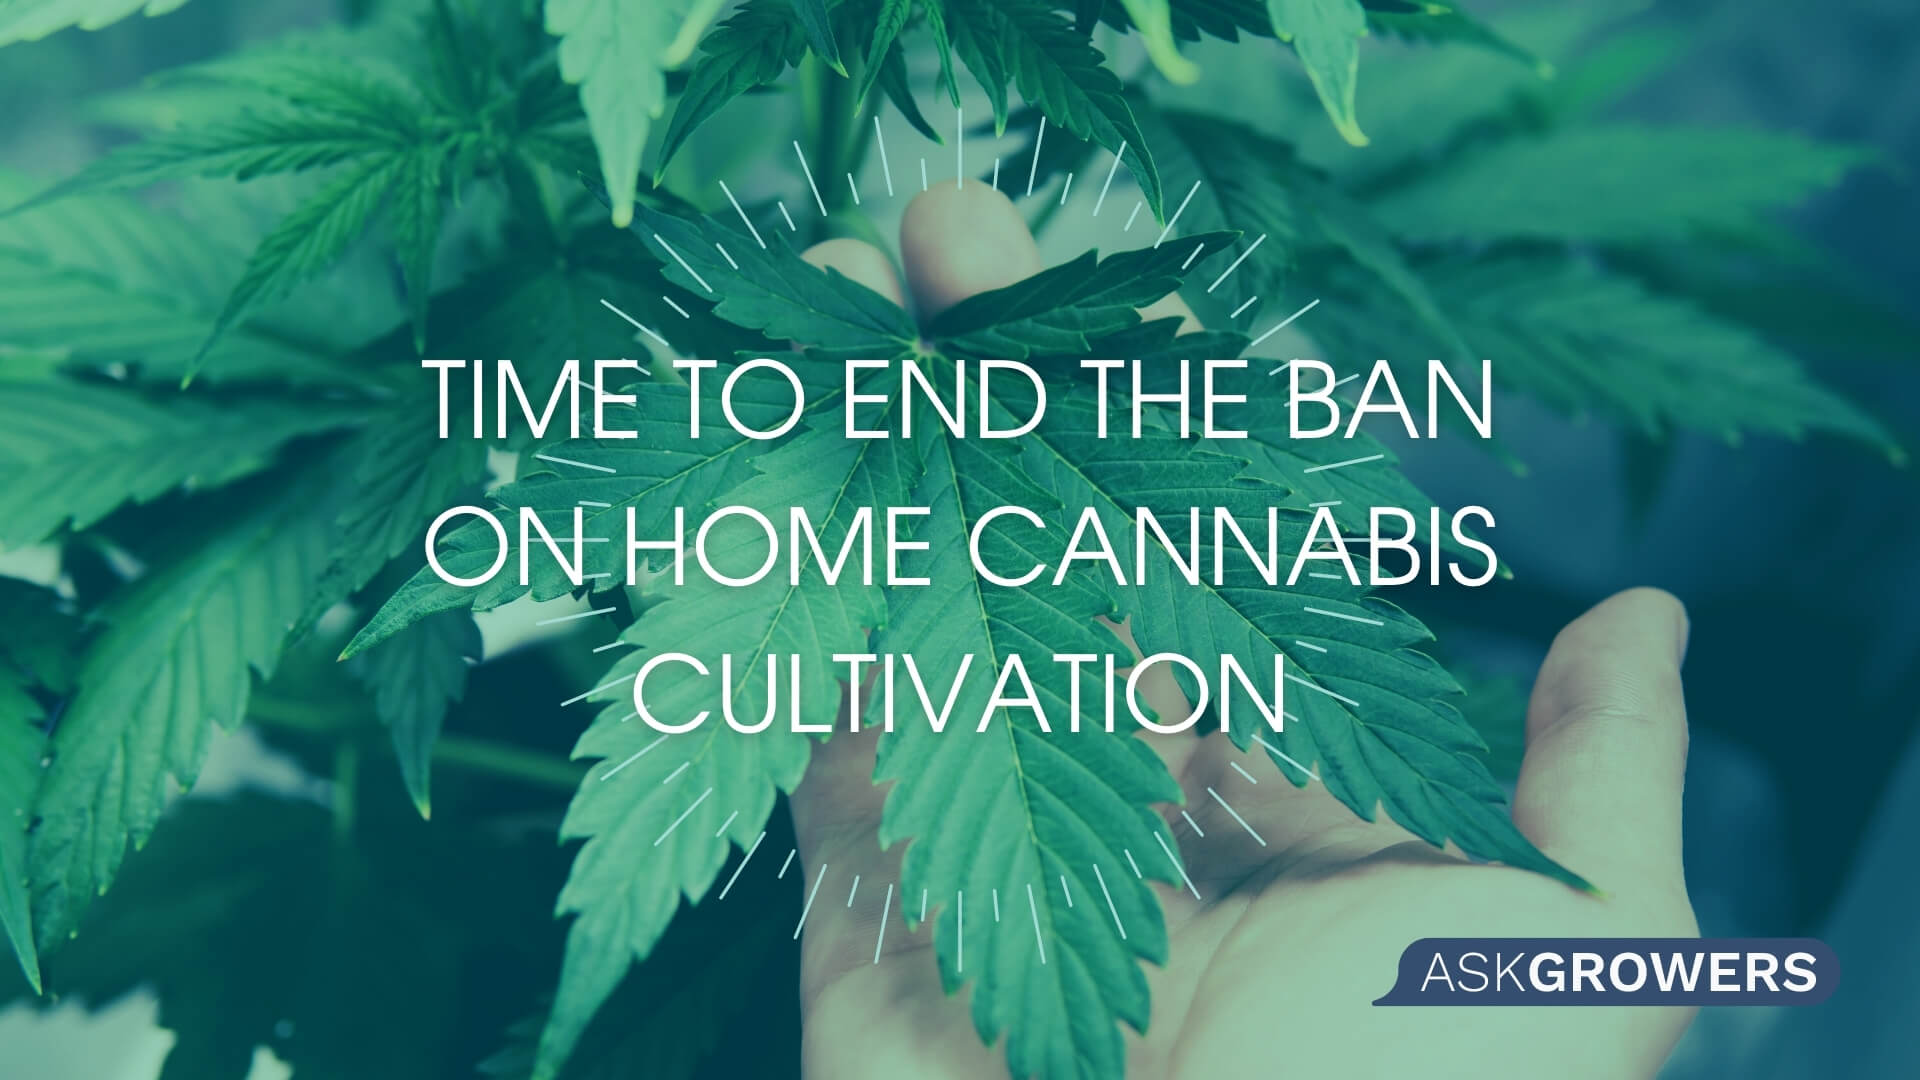 Why Is It Time to End the Ban on Home Cannabis Cultivation in the United States?